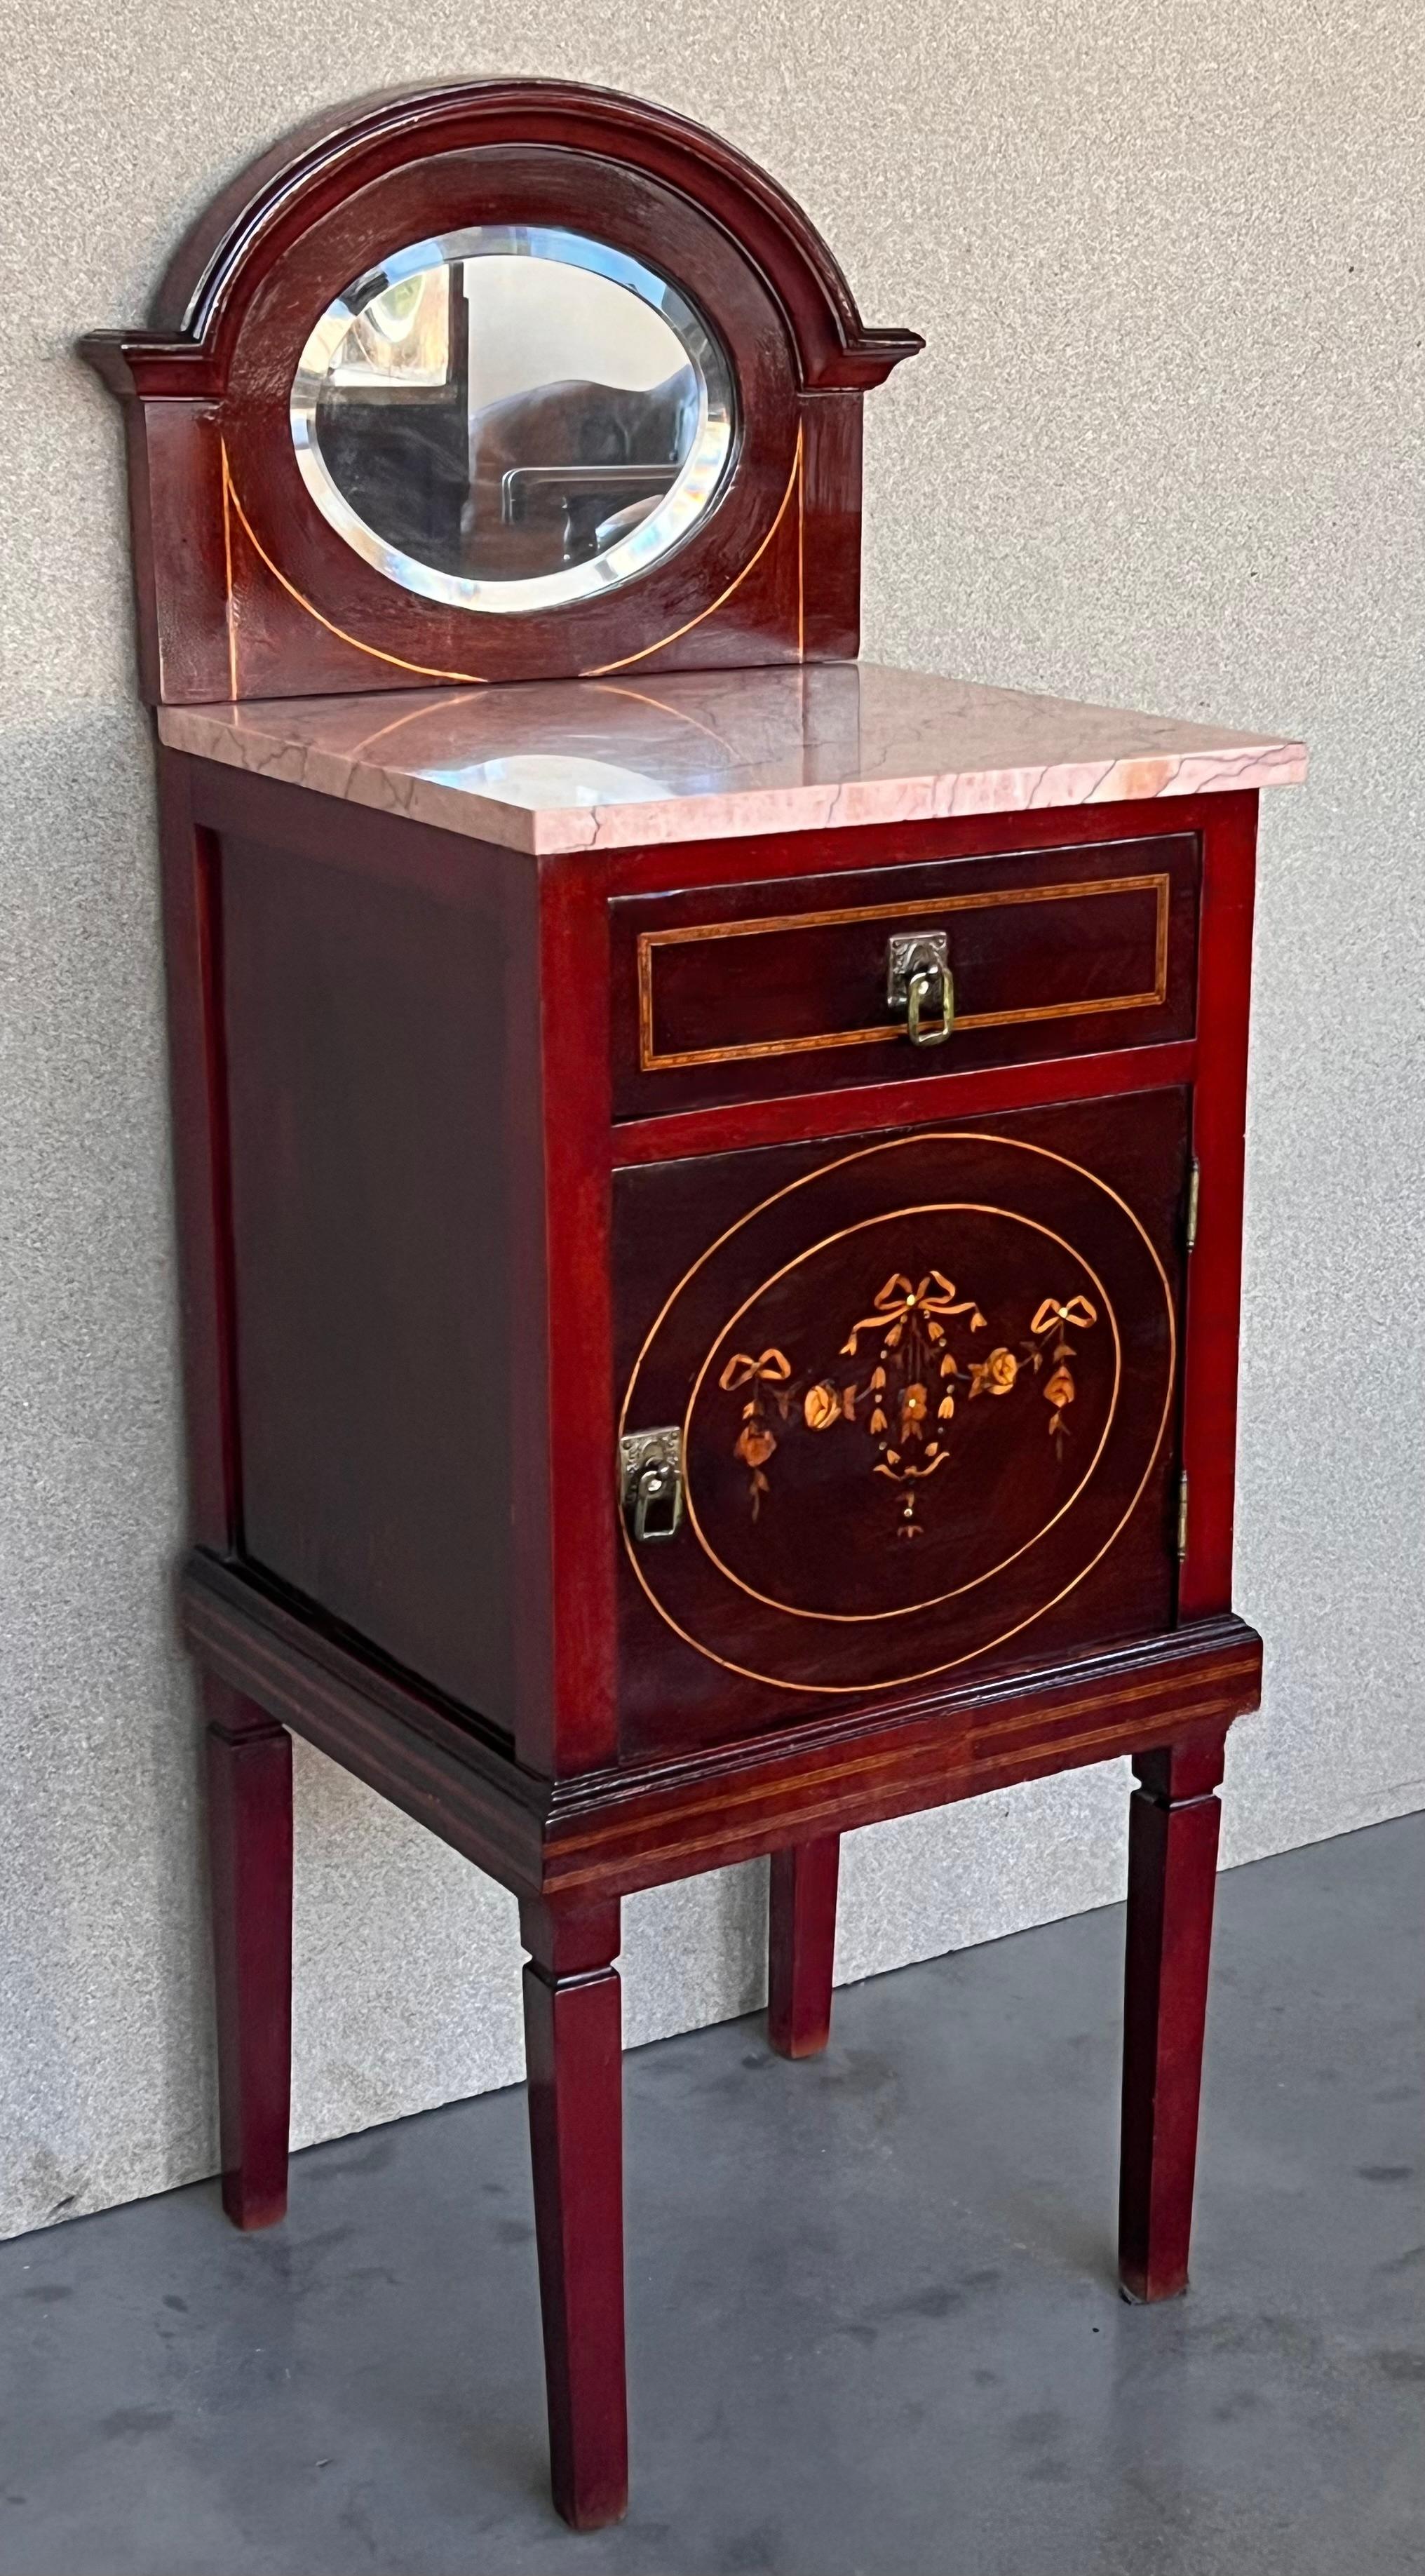 Louis XVI style pair of Marquetry nightstands with wood and mirror crest with shelveone drawer and one compartment.
Originals handles and garniture.
Completely restored.

Measures: Height to the top : 30.31in.